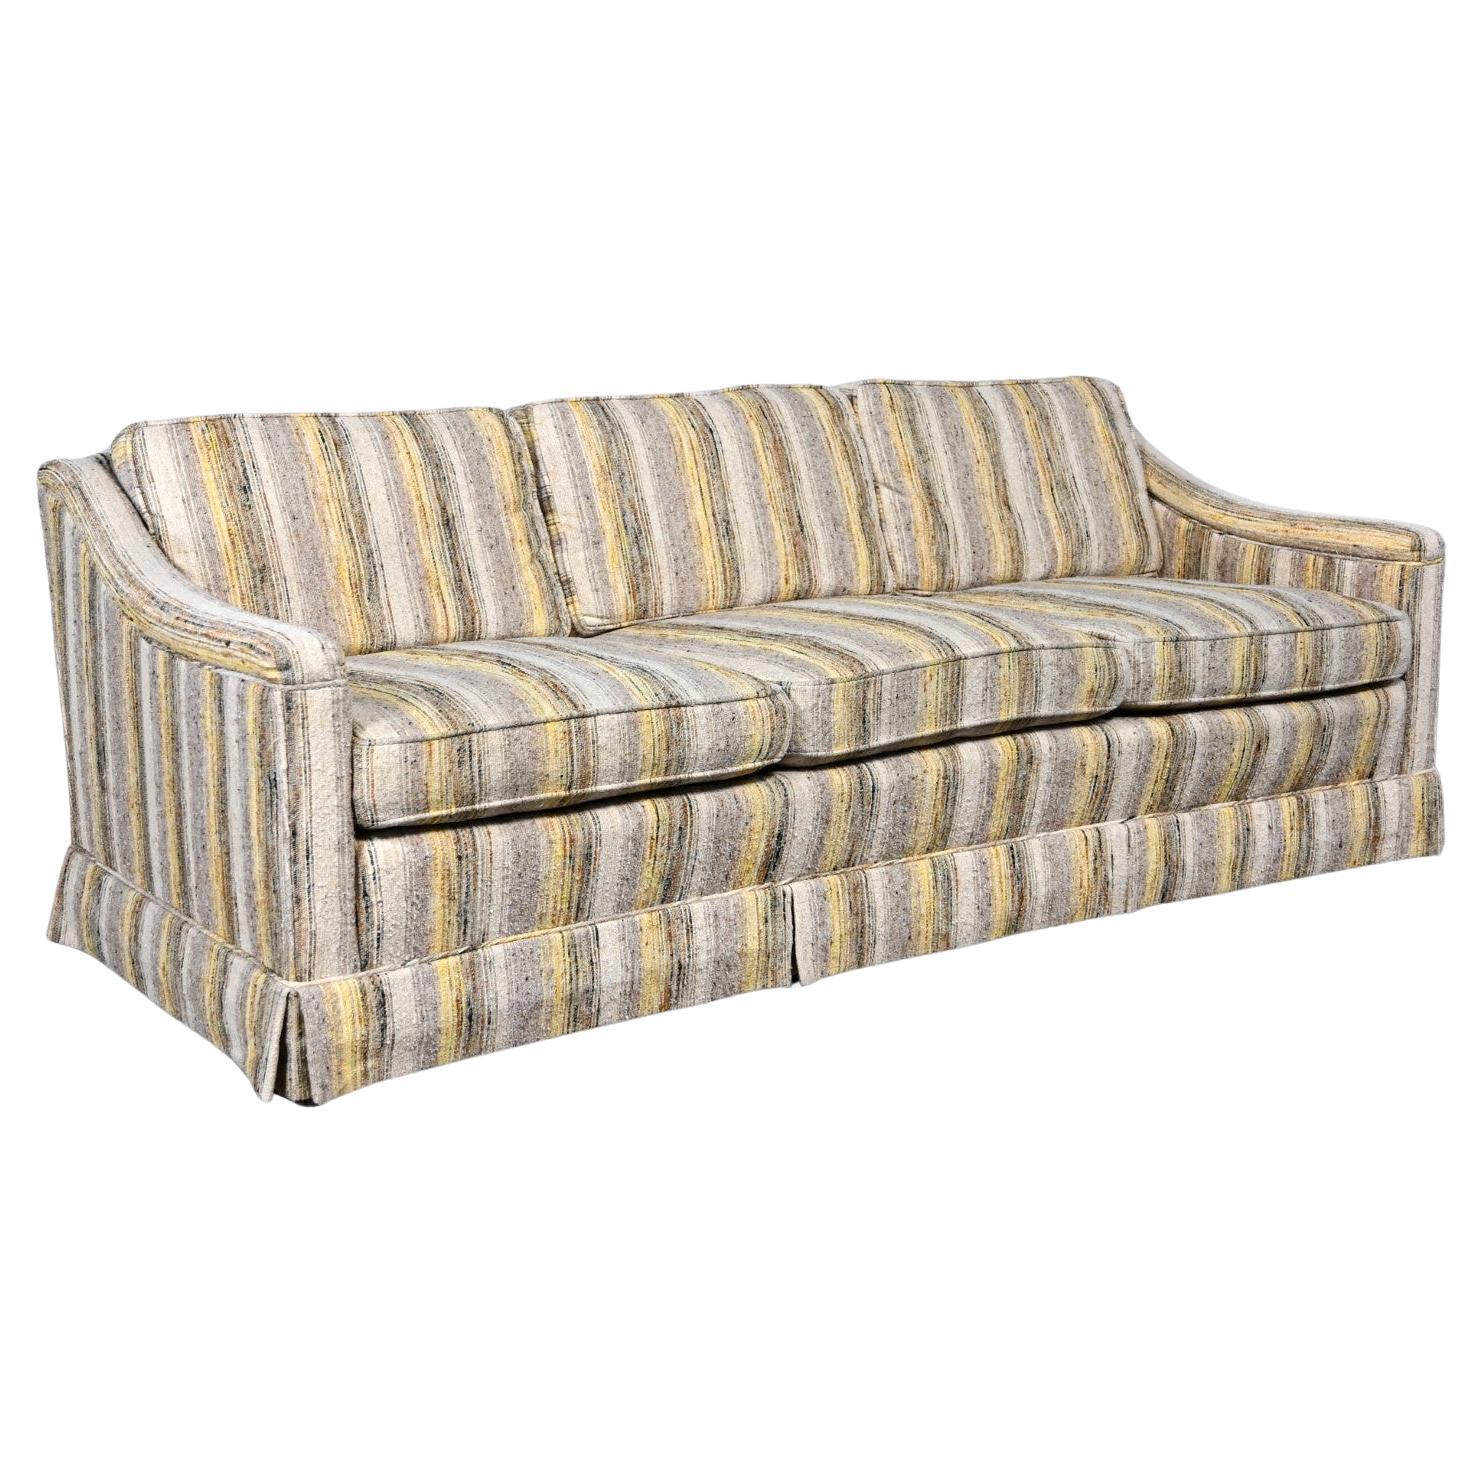 Mid-Century Modern Henredon Sofa Modified Lawson Style Yellow & Beige Striped For Sale